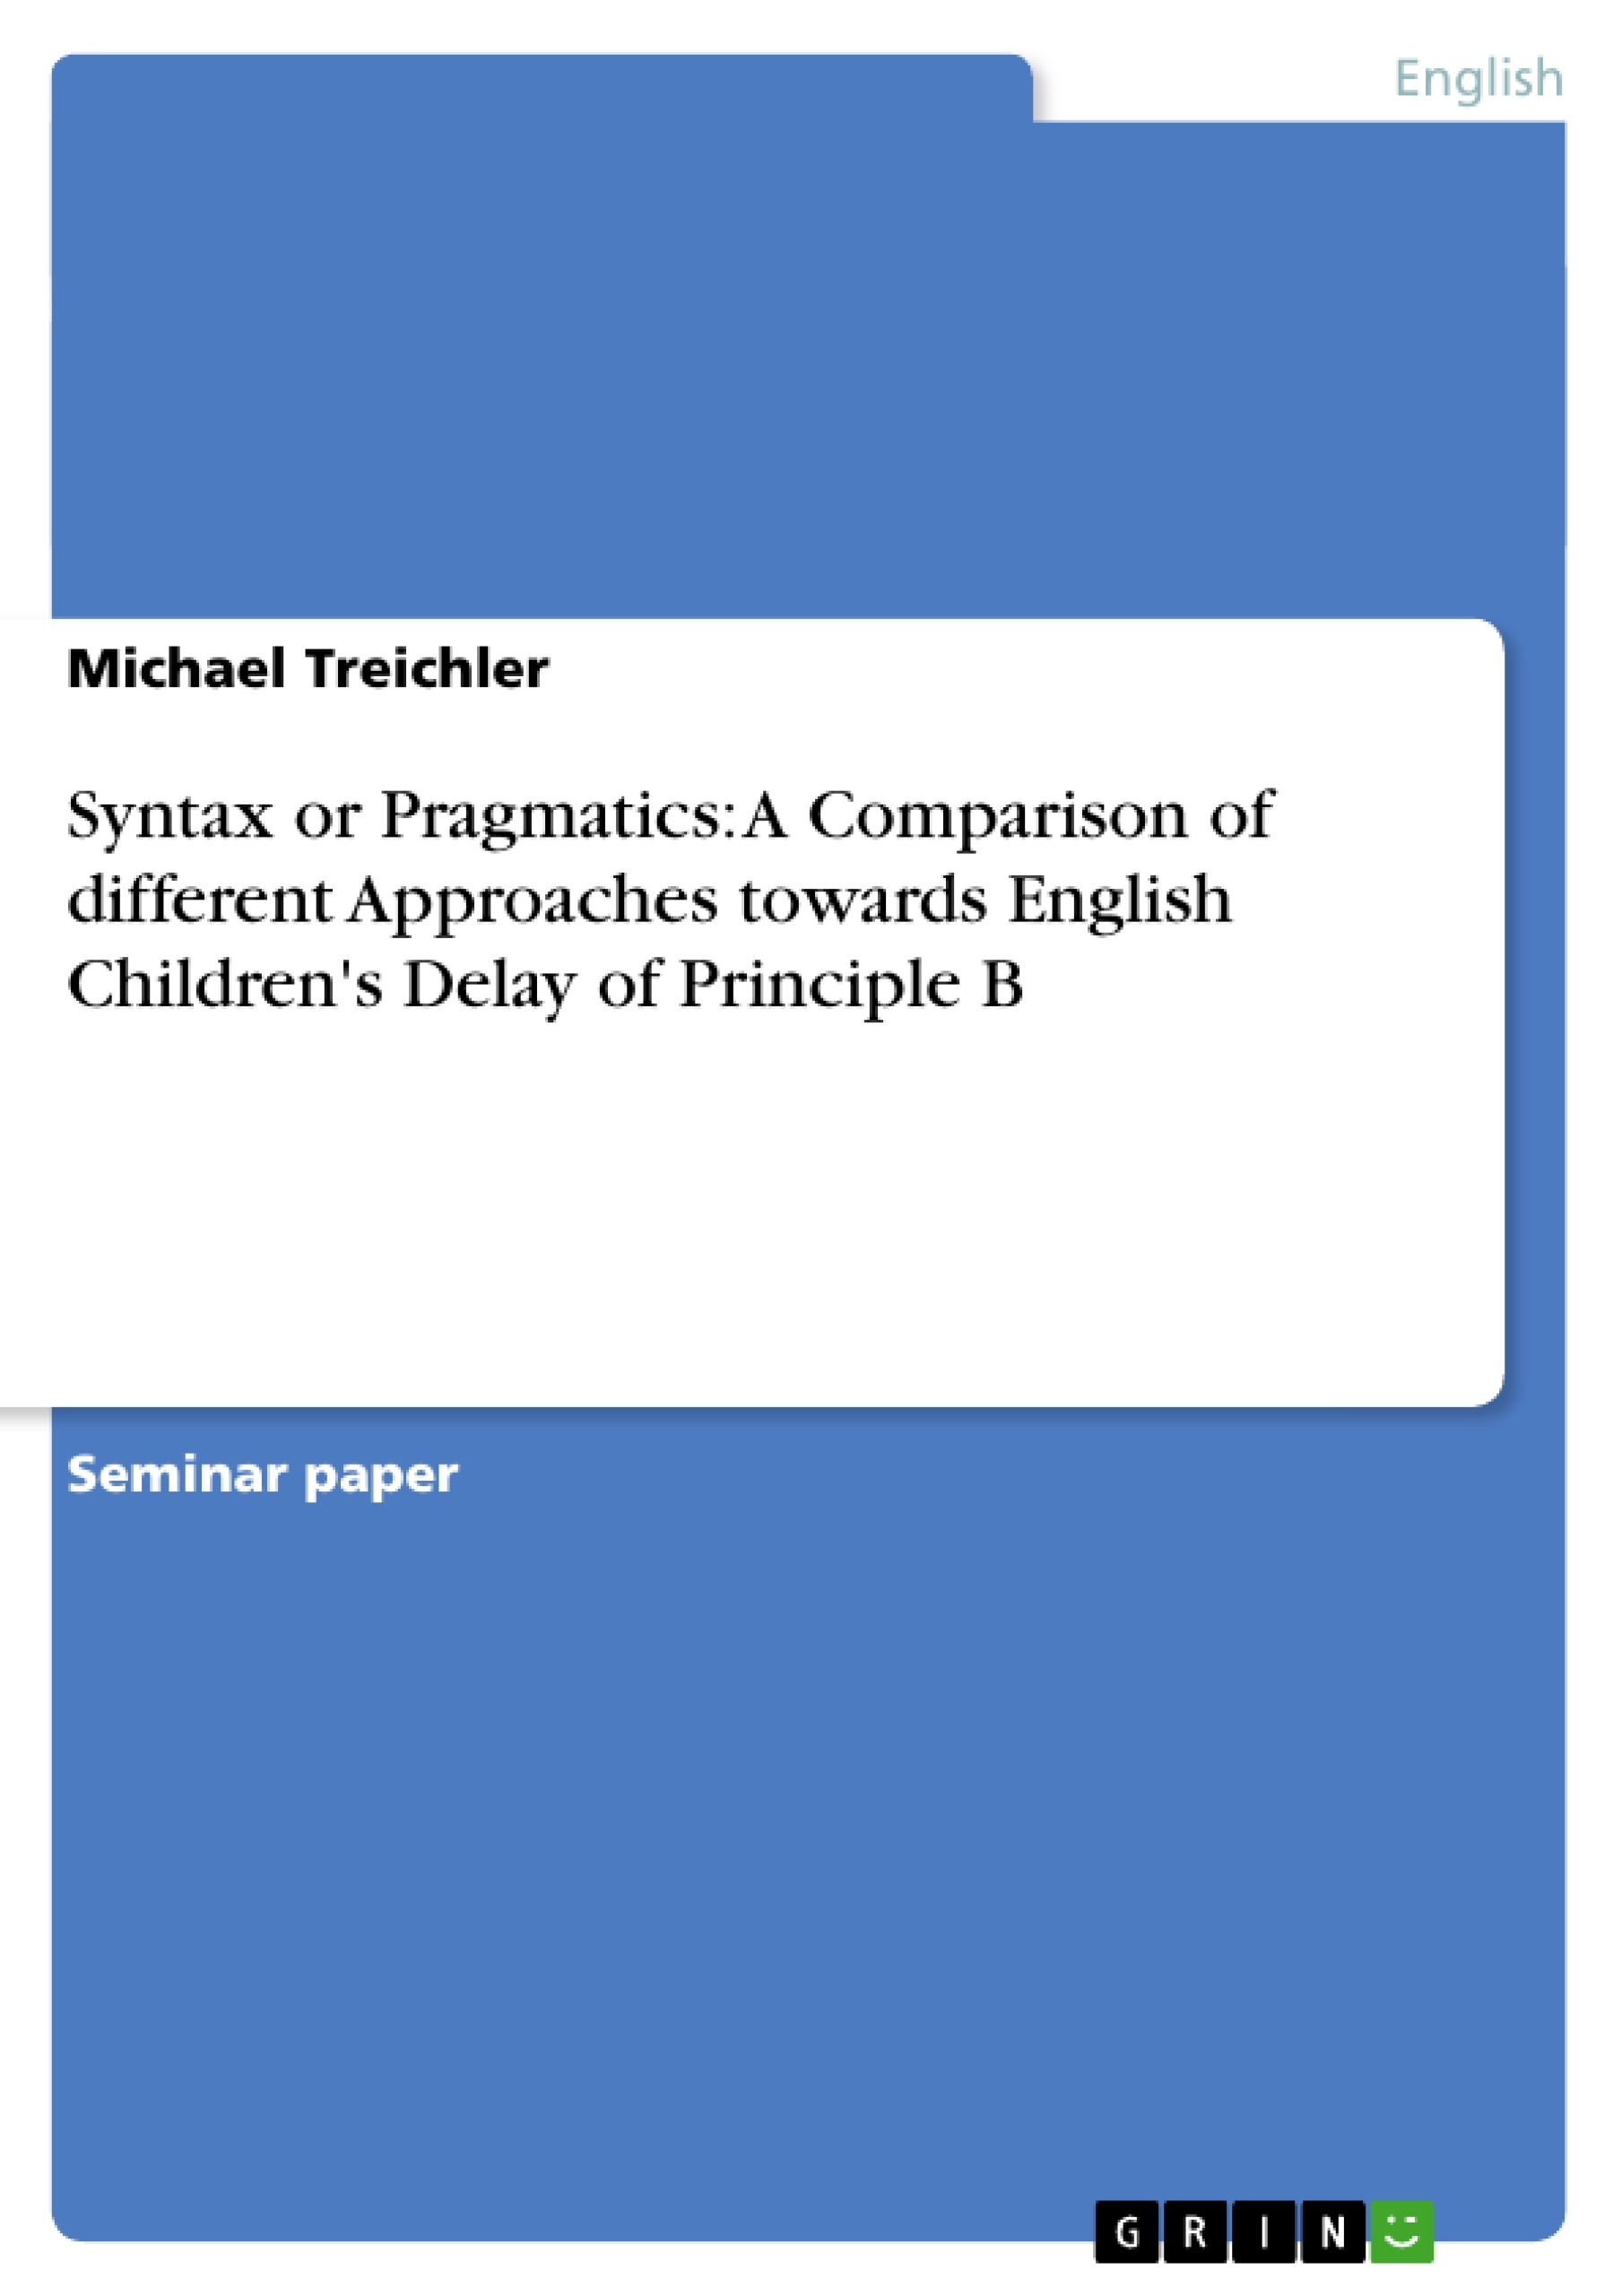 Titre: Syntax or Pragmatics: A Comparison of different Approaches towards English Children's Delay of Principle B